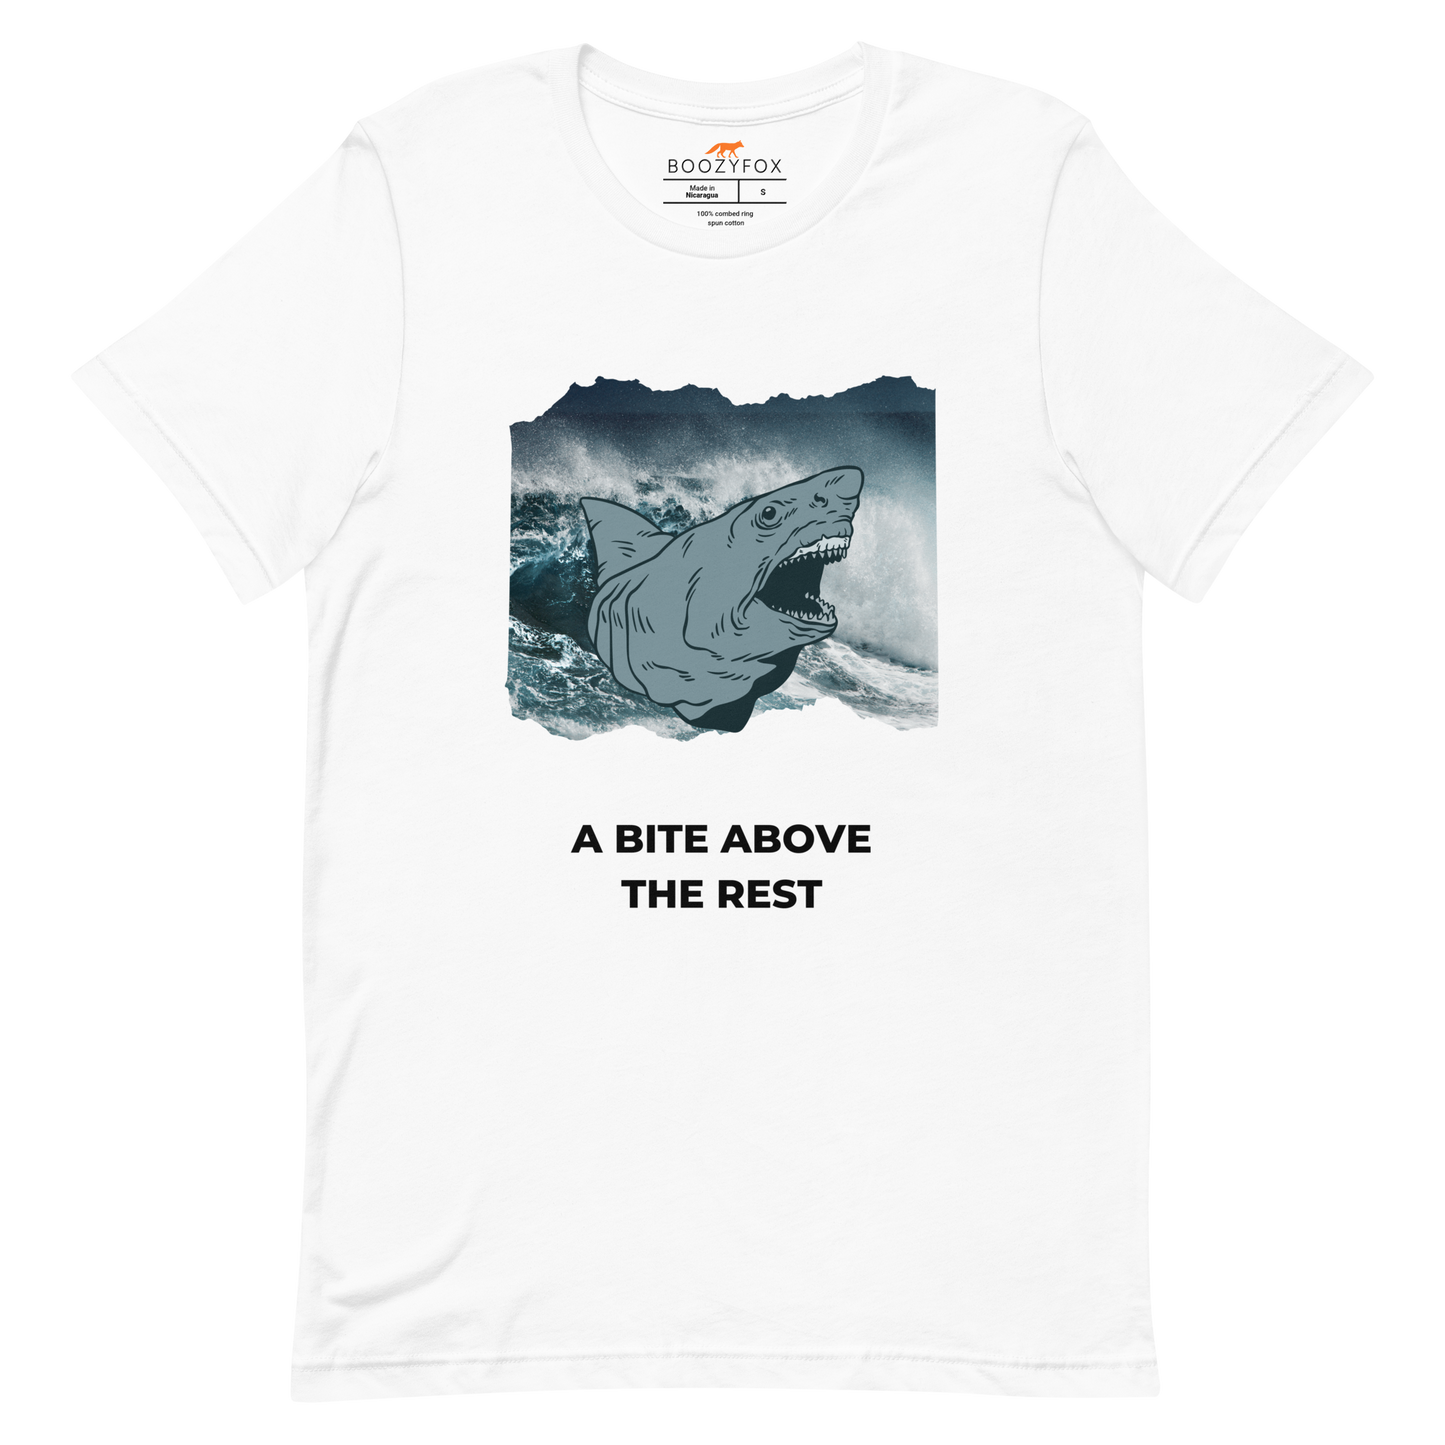 White Premium Megalodon Tee featuring A Bite Above the Rest graphic on the chest - Funny Graphic Megalodon Tees - Boozy Fox